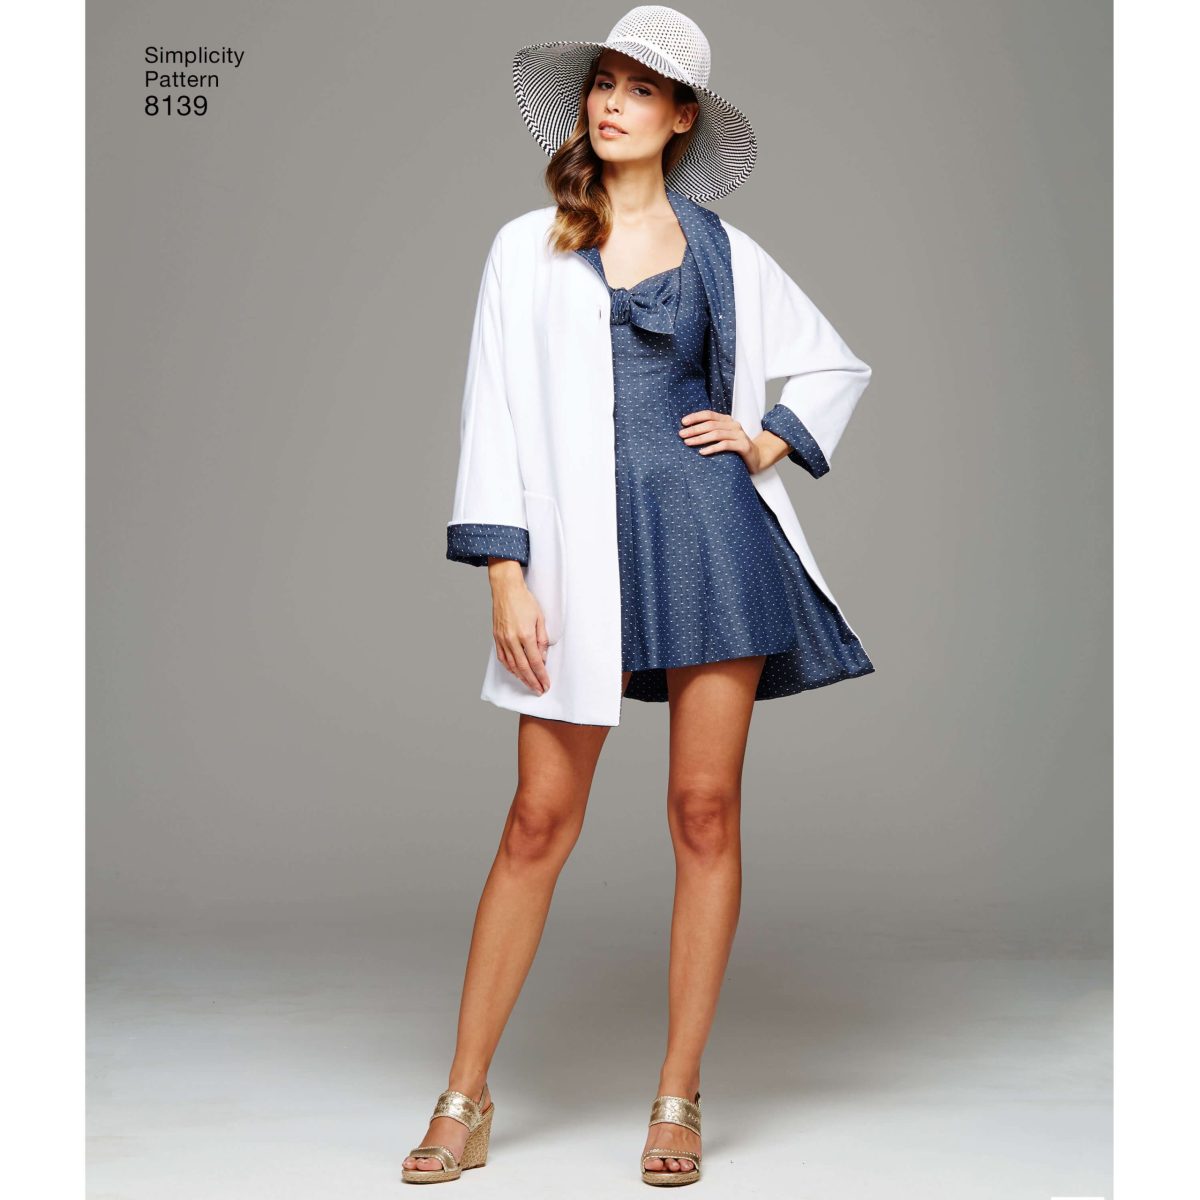 Simplicity Pattern 8139 Misses' Vintage Bathing Dress and Beach Coat